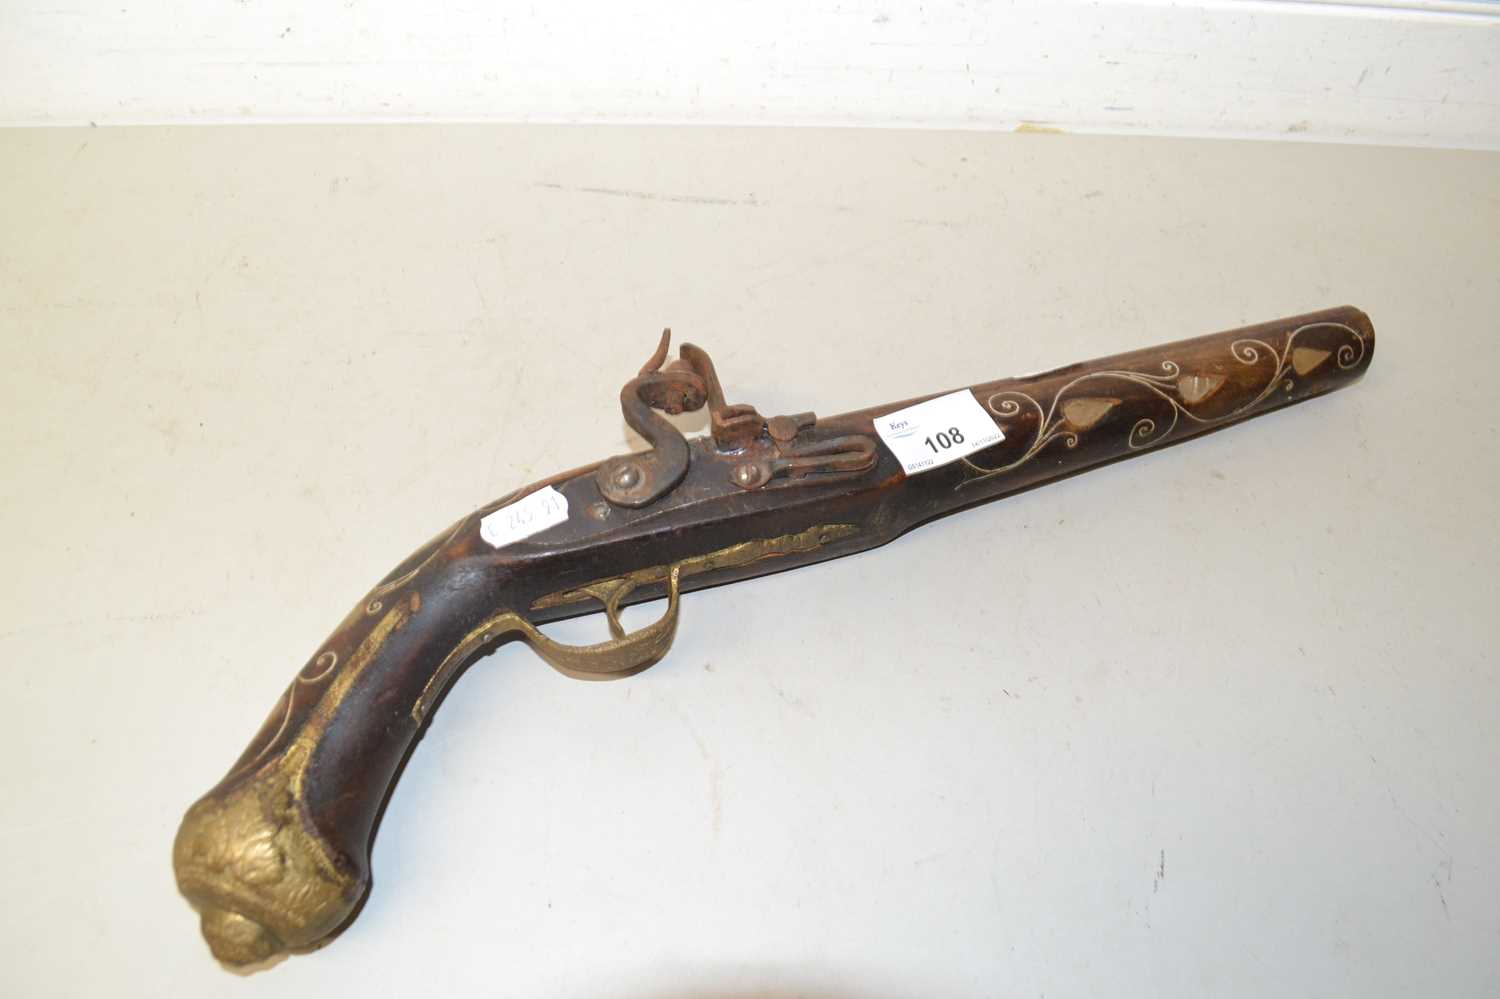 Inlaid Afghan type pistol, probably a tourist piece